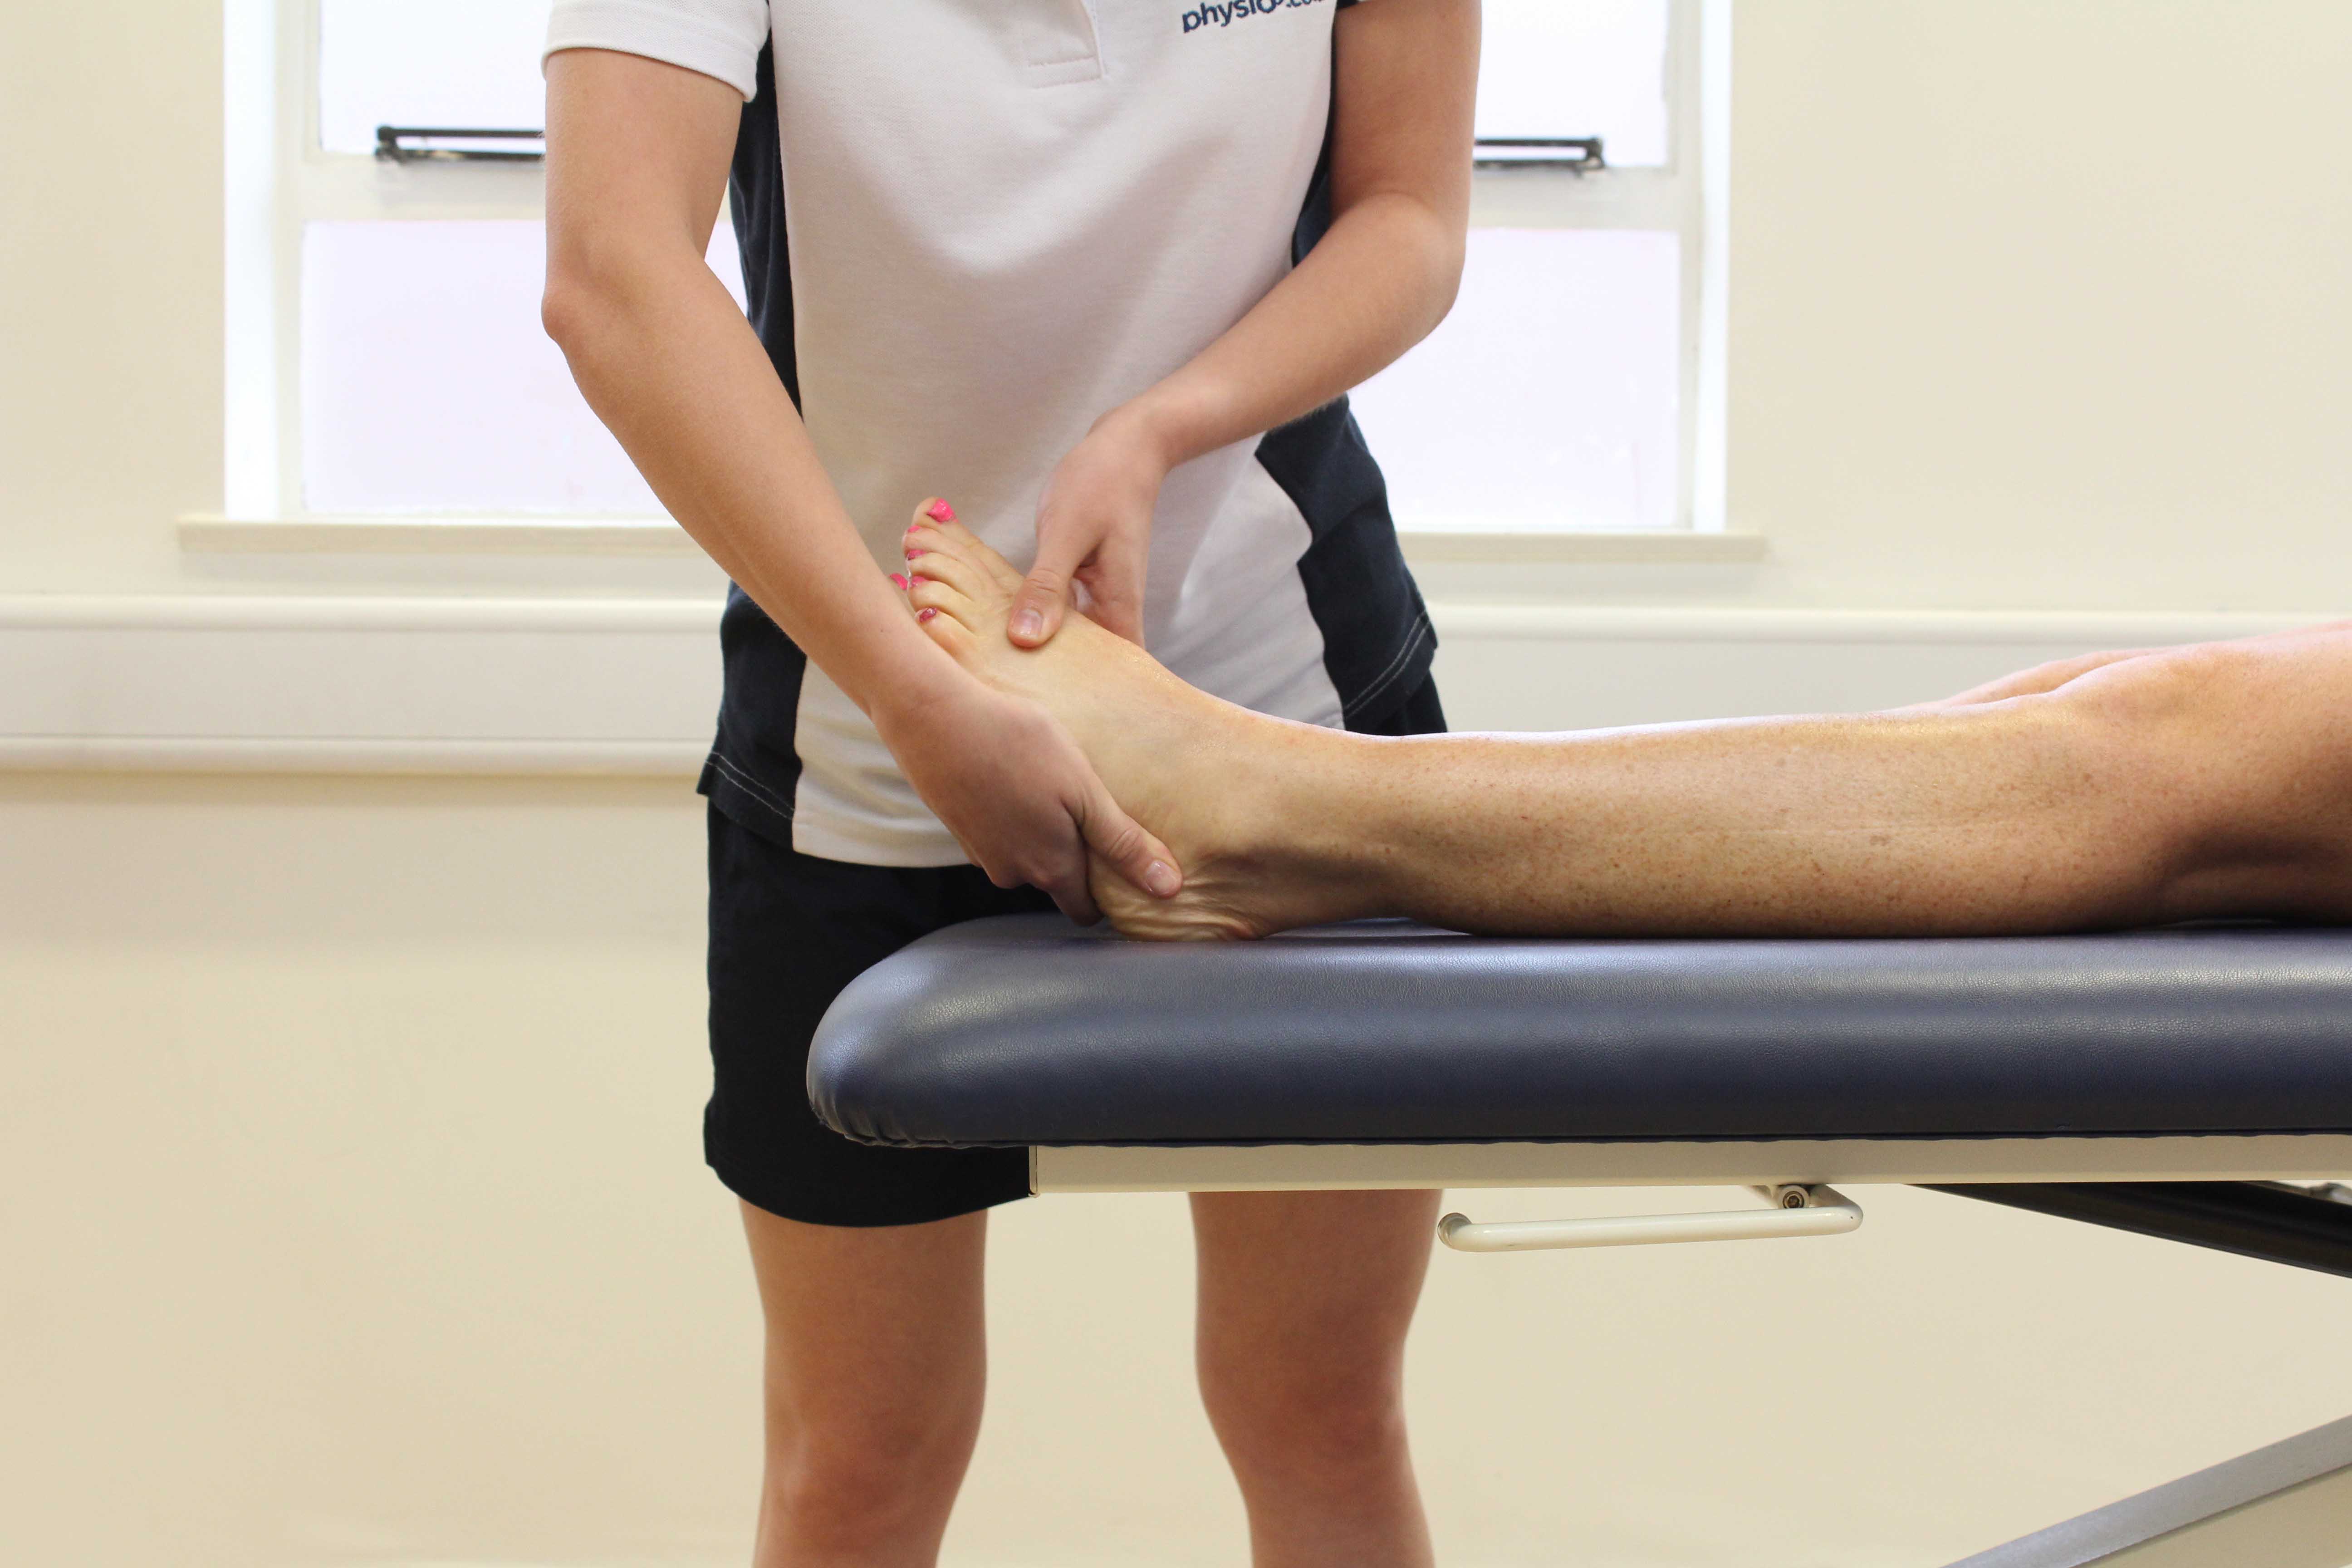 Soft tissue massage applied to the bones and connective tissue on the anterior portion of the foot